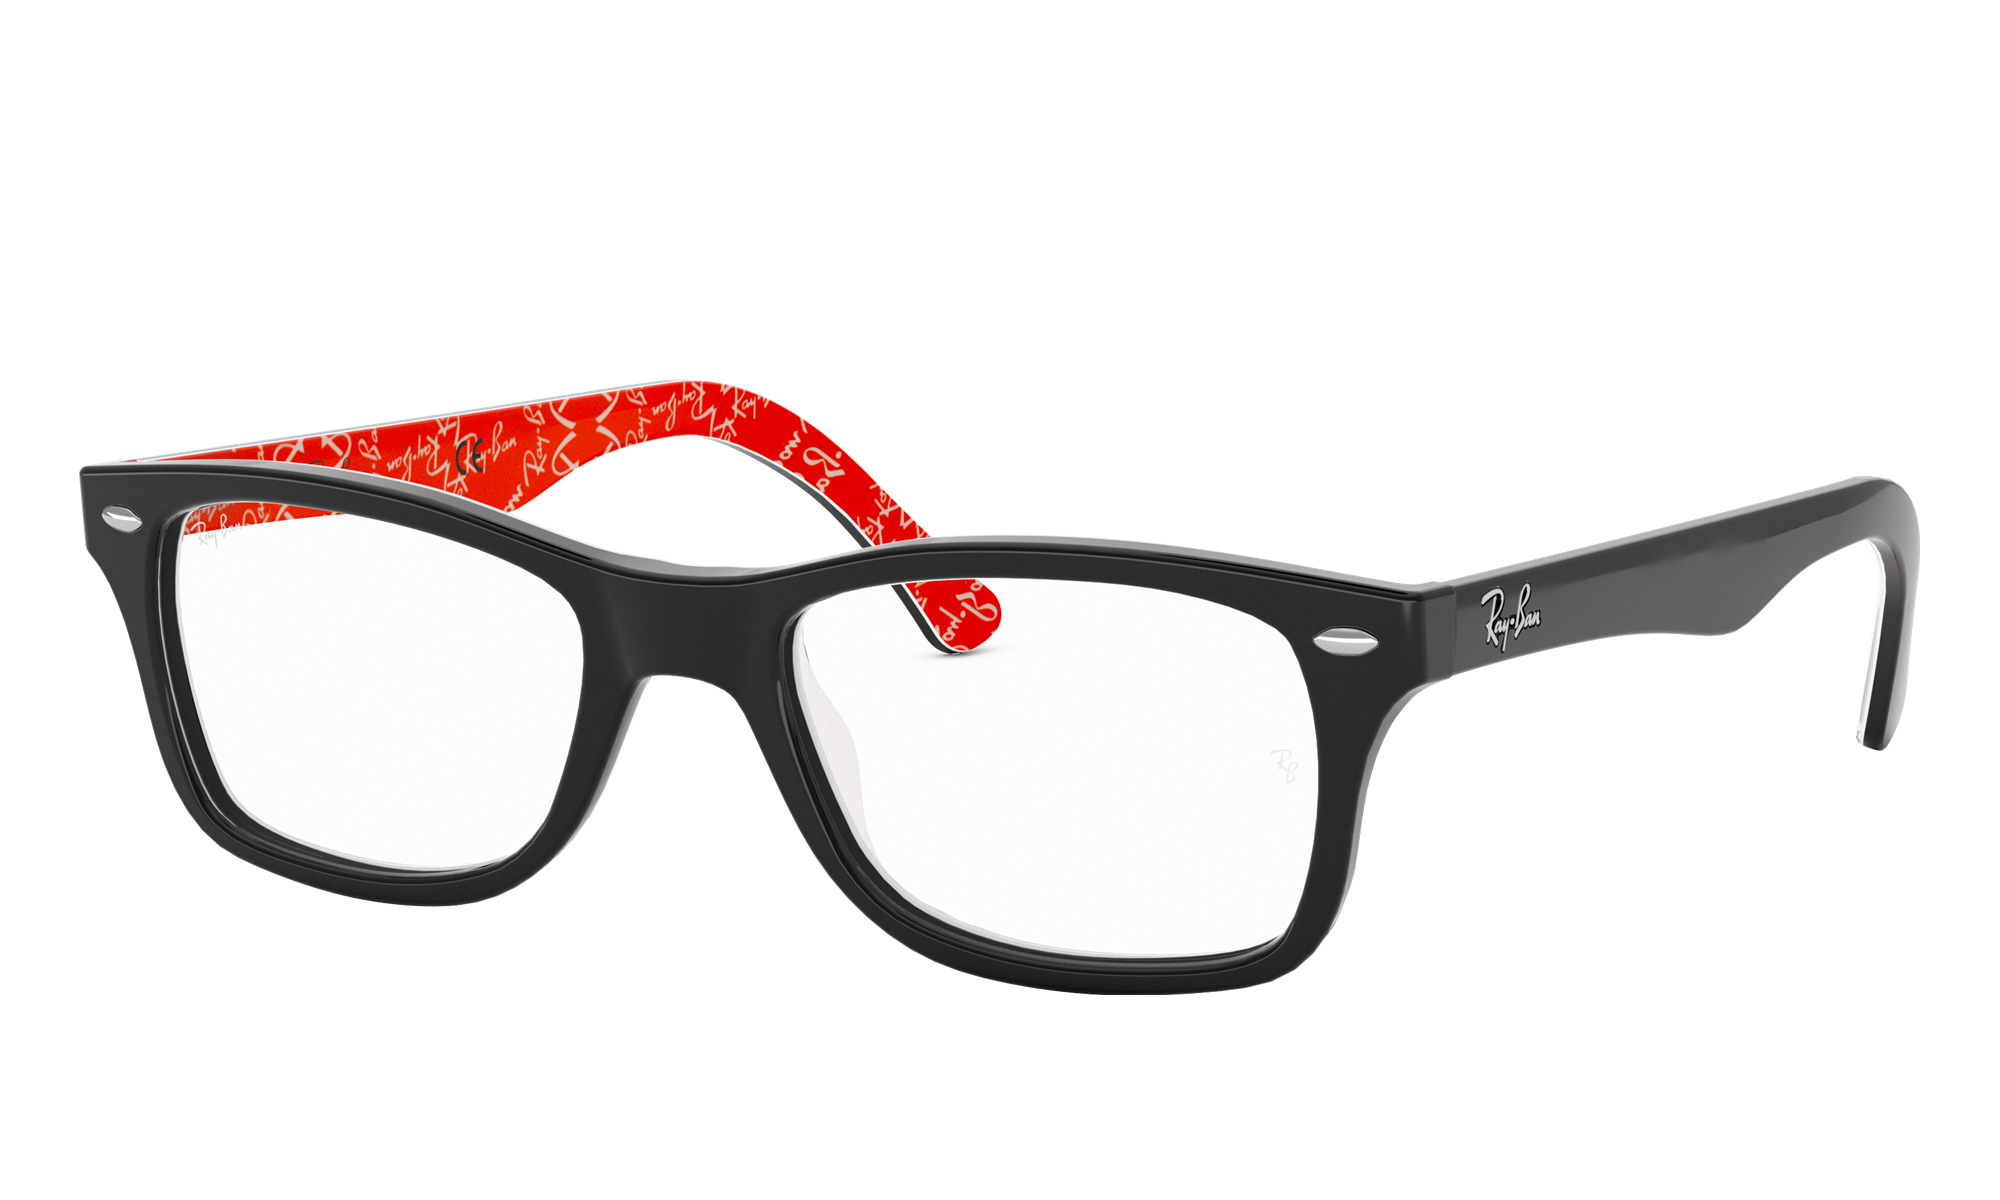 Ray-Ban Unisex Rx5228 Black On Red Size: Large